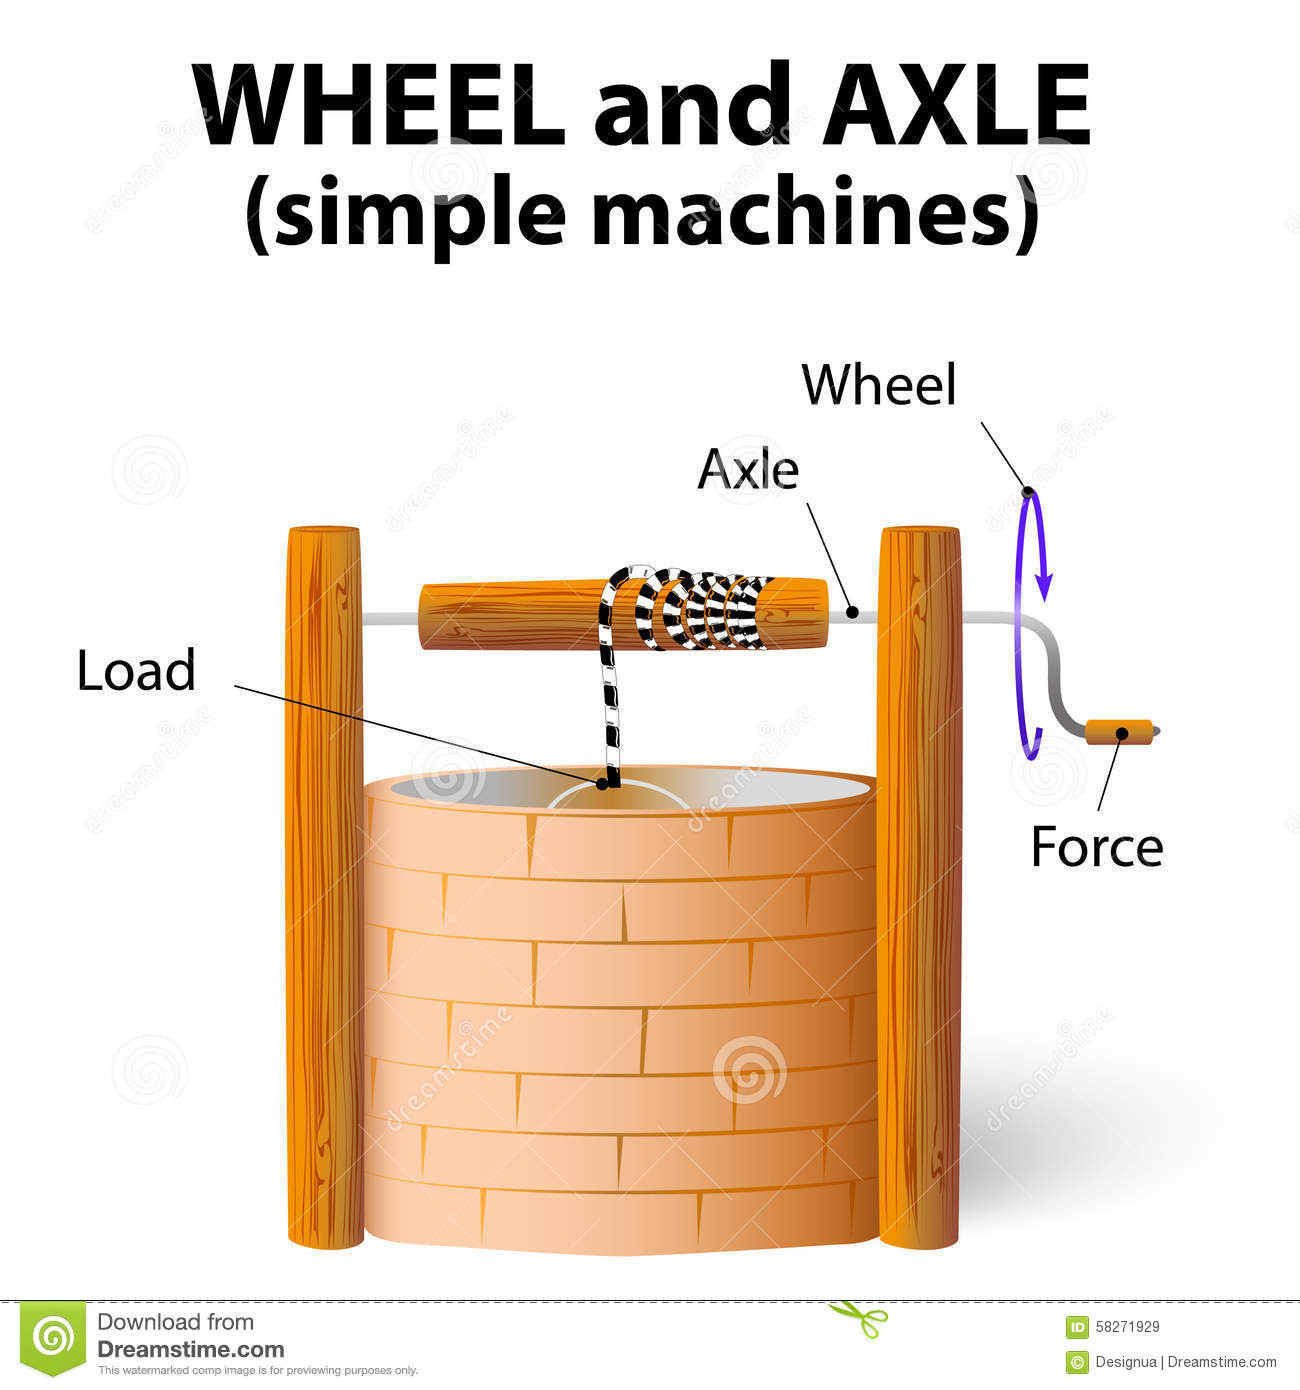 Diagram Of Wheel and Axle Wheel and Axle Stock Vector. Illustration Of Farm, Crank – 58271929 Of Diagram Of Wheel and Axle